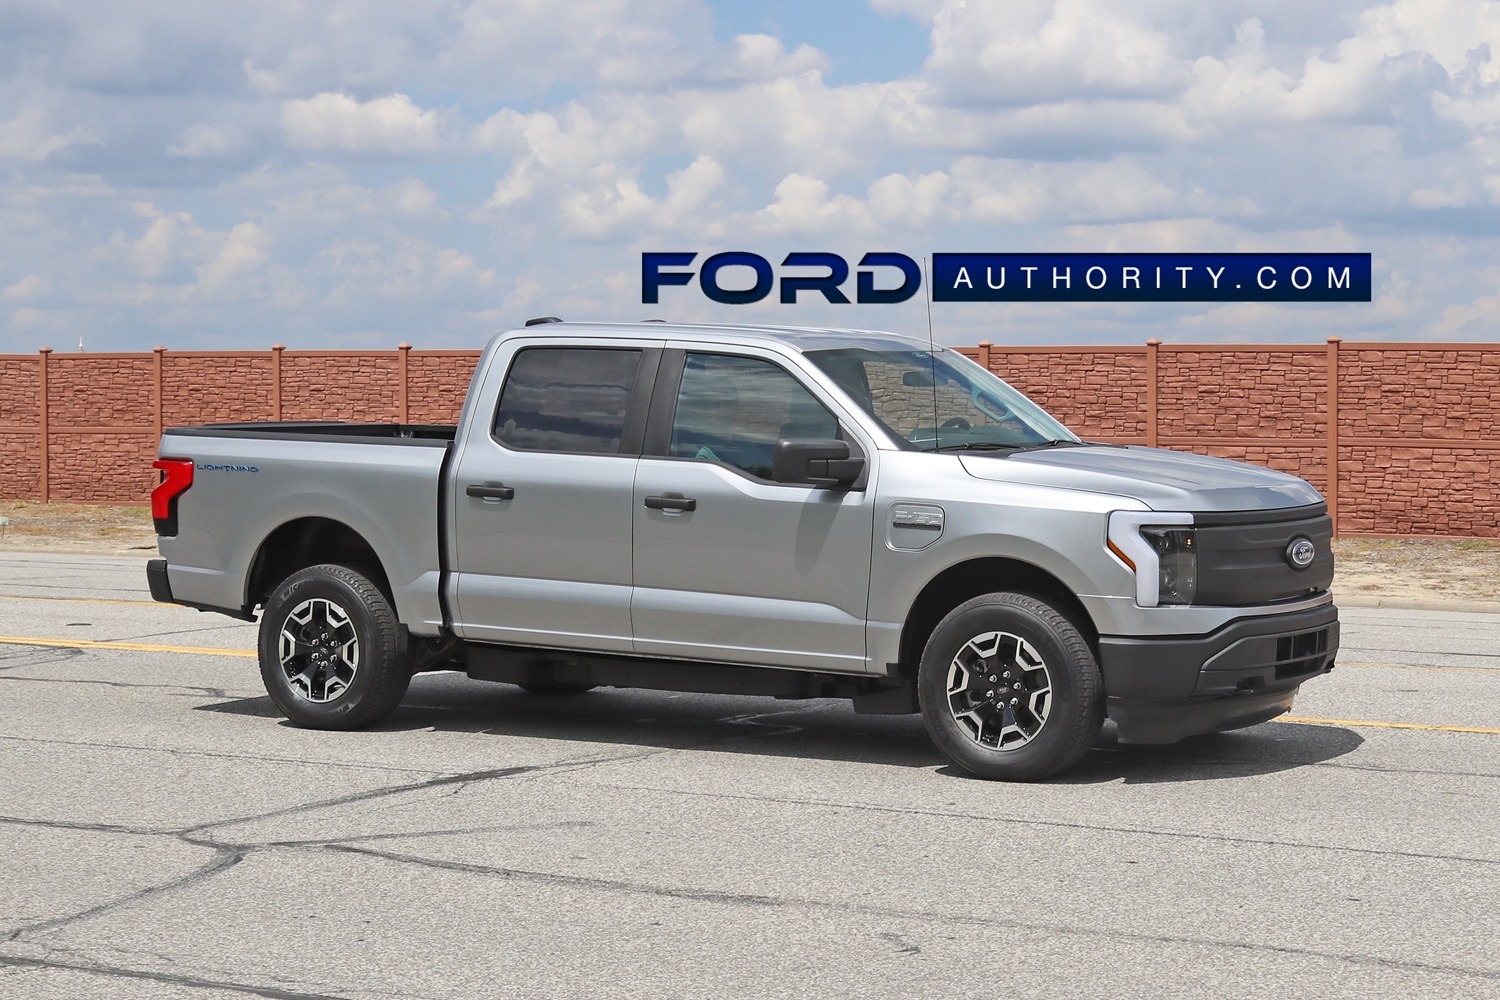 2022-Ford-F-150-Lightning-Pro-Iconic-Silver-Real-World-Pictures-Exterior-003.jpg